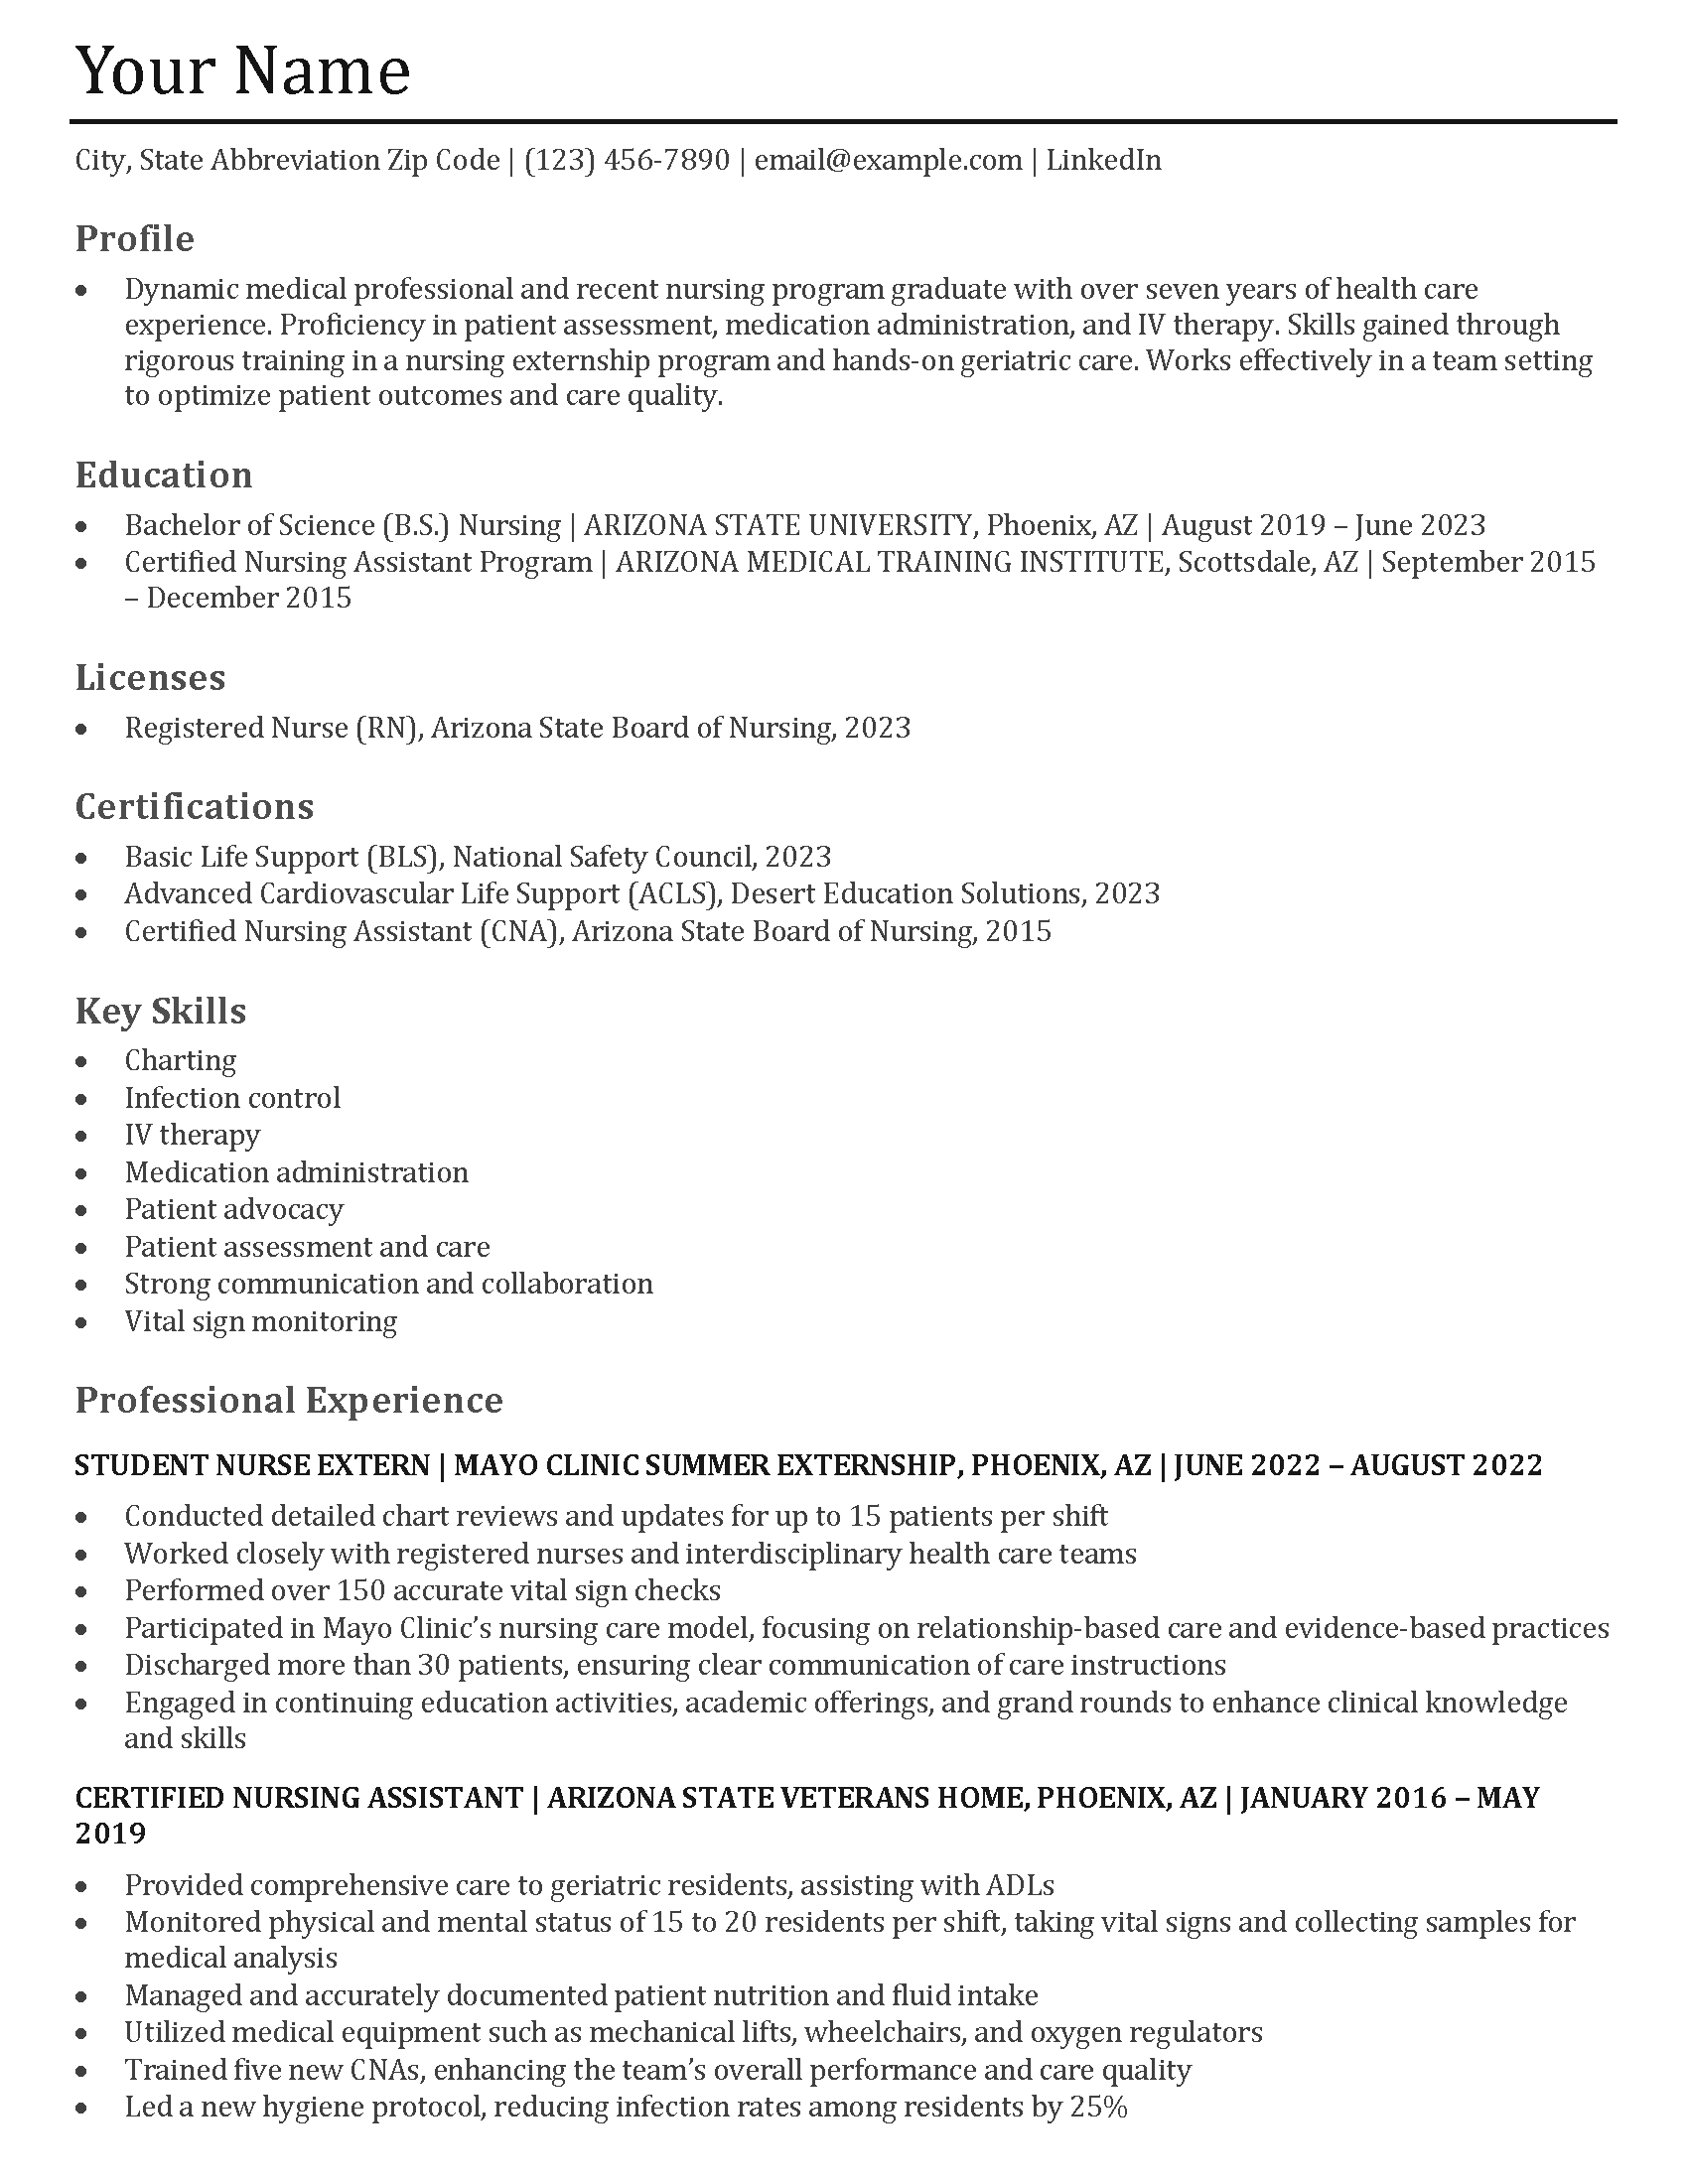 New Grad Nursing Resume Templates and Examples Image